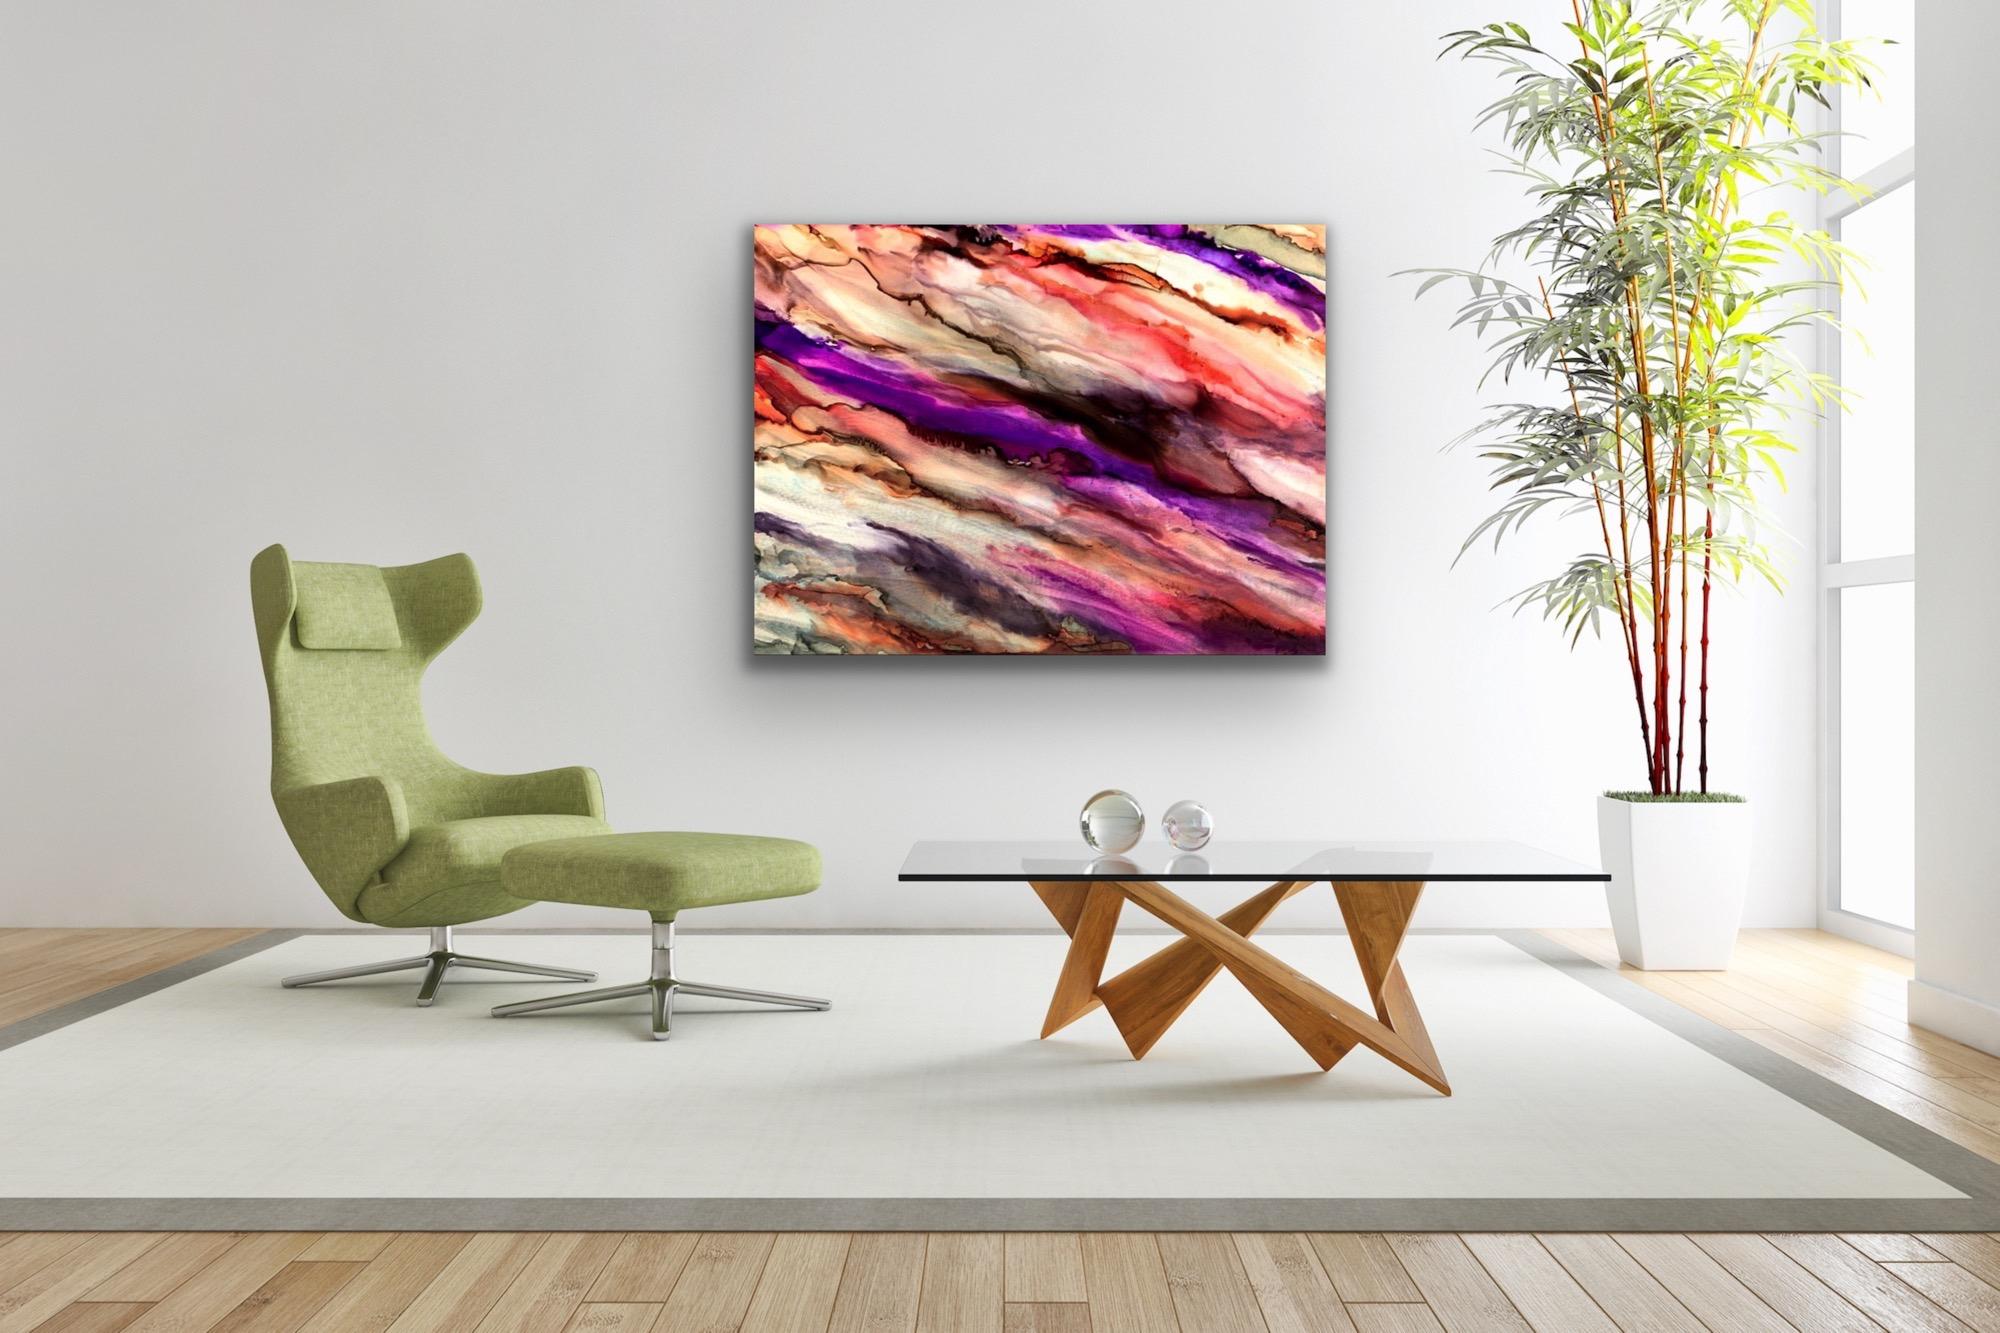 Modern Contemporary Industrial Abstract Giclee on Metal Art by Sebastian - Print by Sebastian Reiter